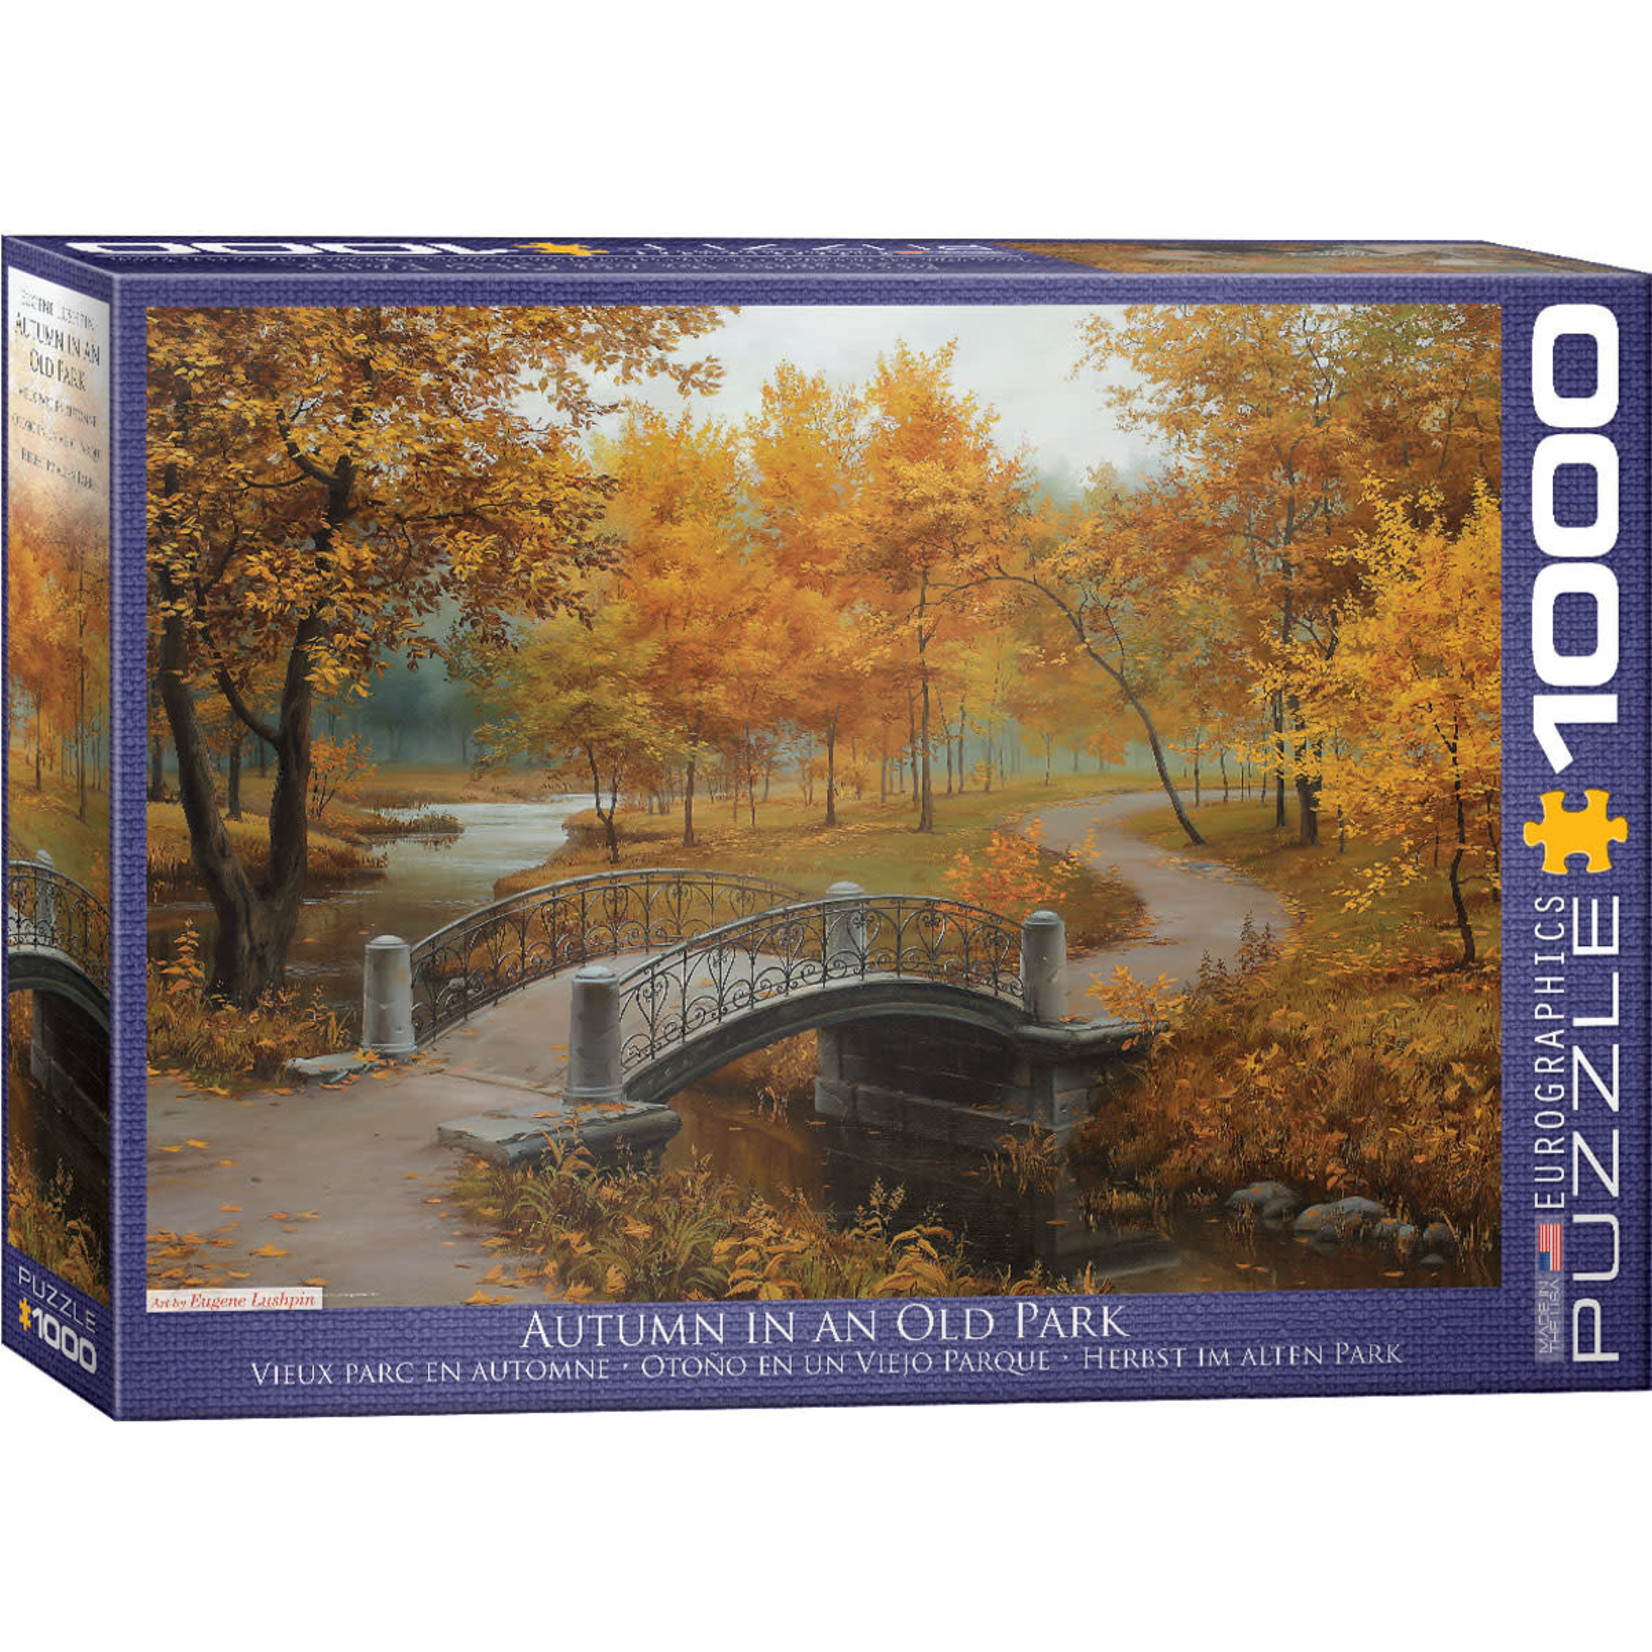 EuroGraphics Autumn in an Old Park 1000pc